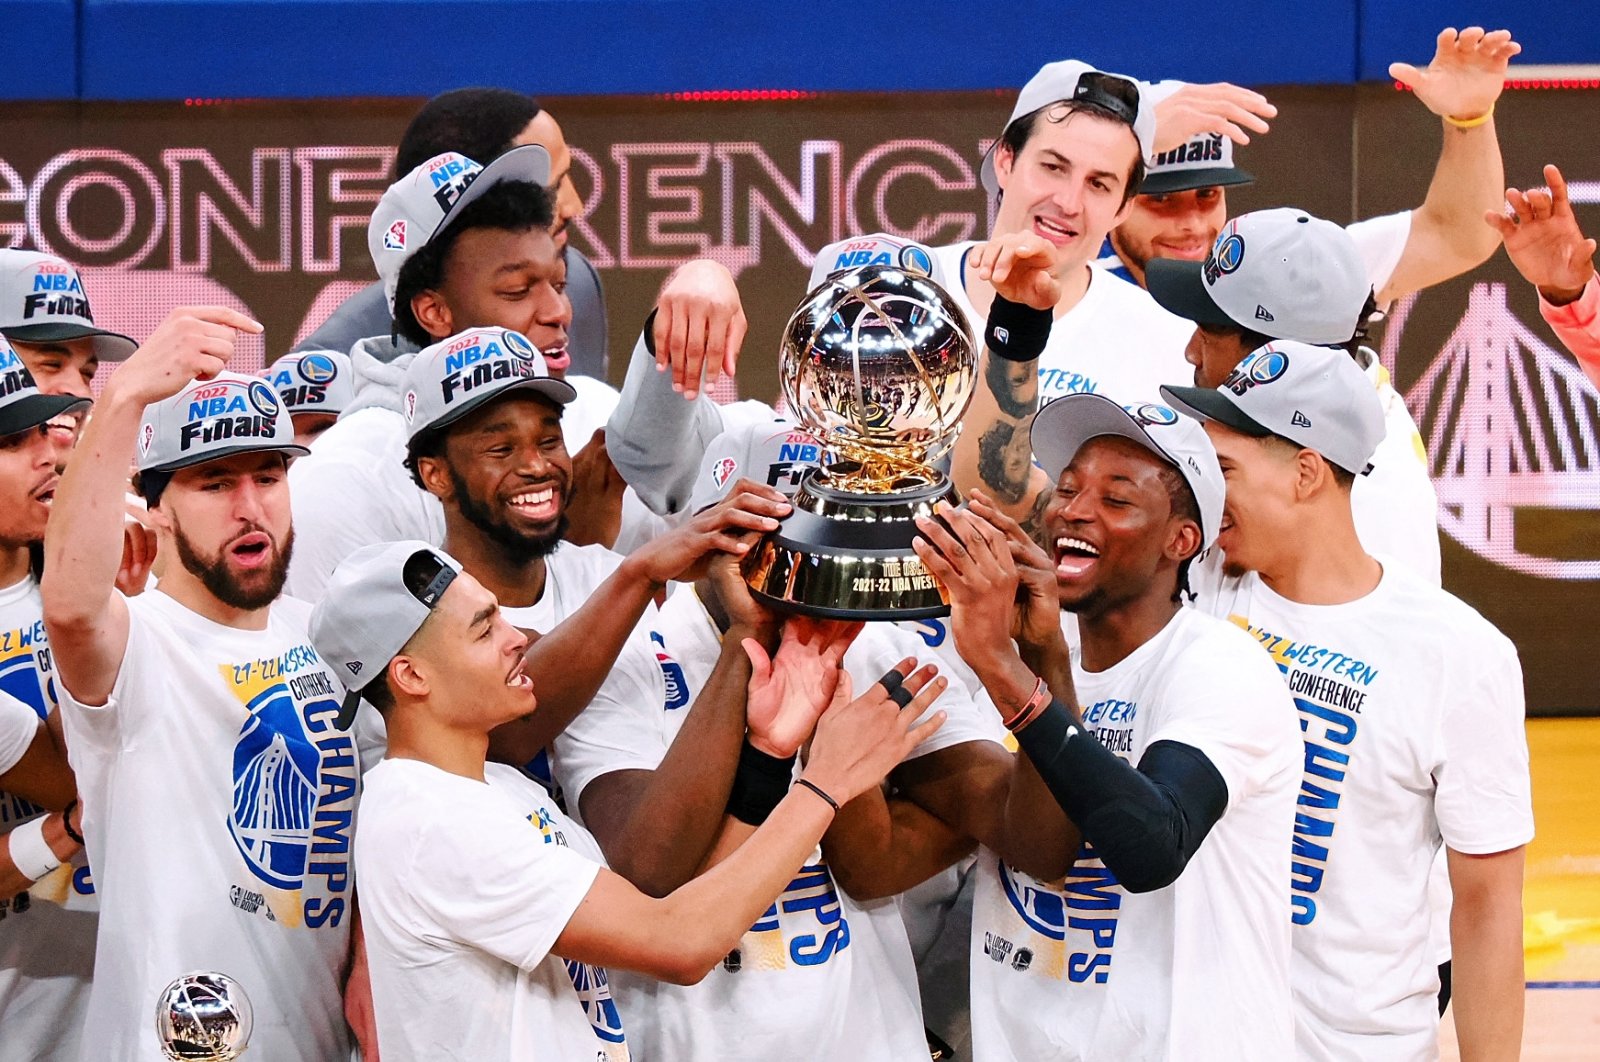 The Golden State Warriors celebrate after winning Game 5 of the 2022 western conference finals against the Dallas Mavericks, San Francisco, California, U.S., May 26, 2022.